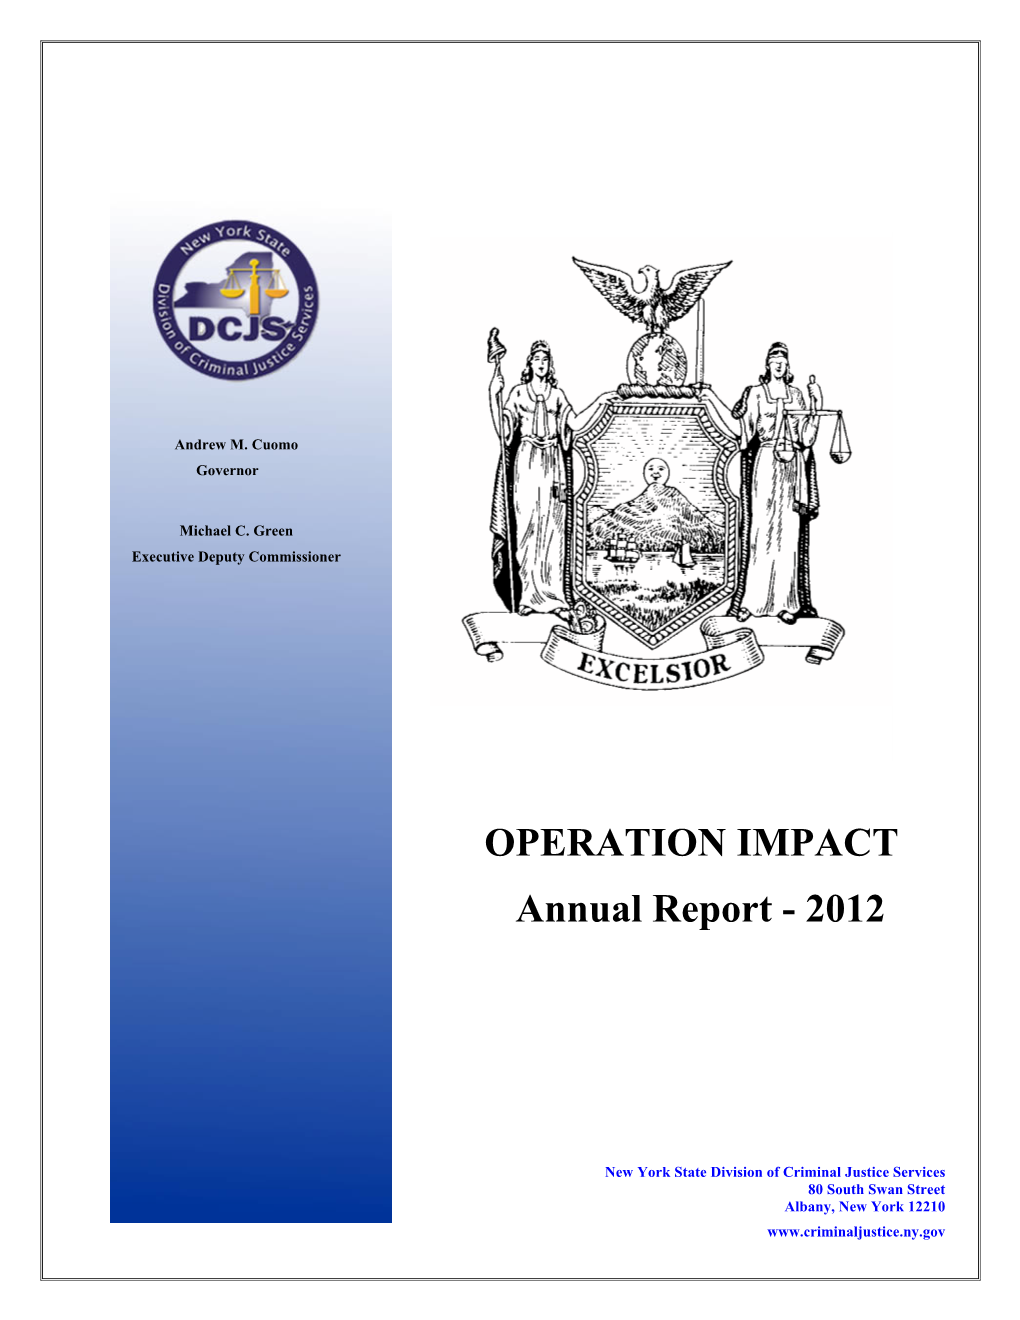 OPERATION IMPACT Annual Report - 2012